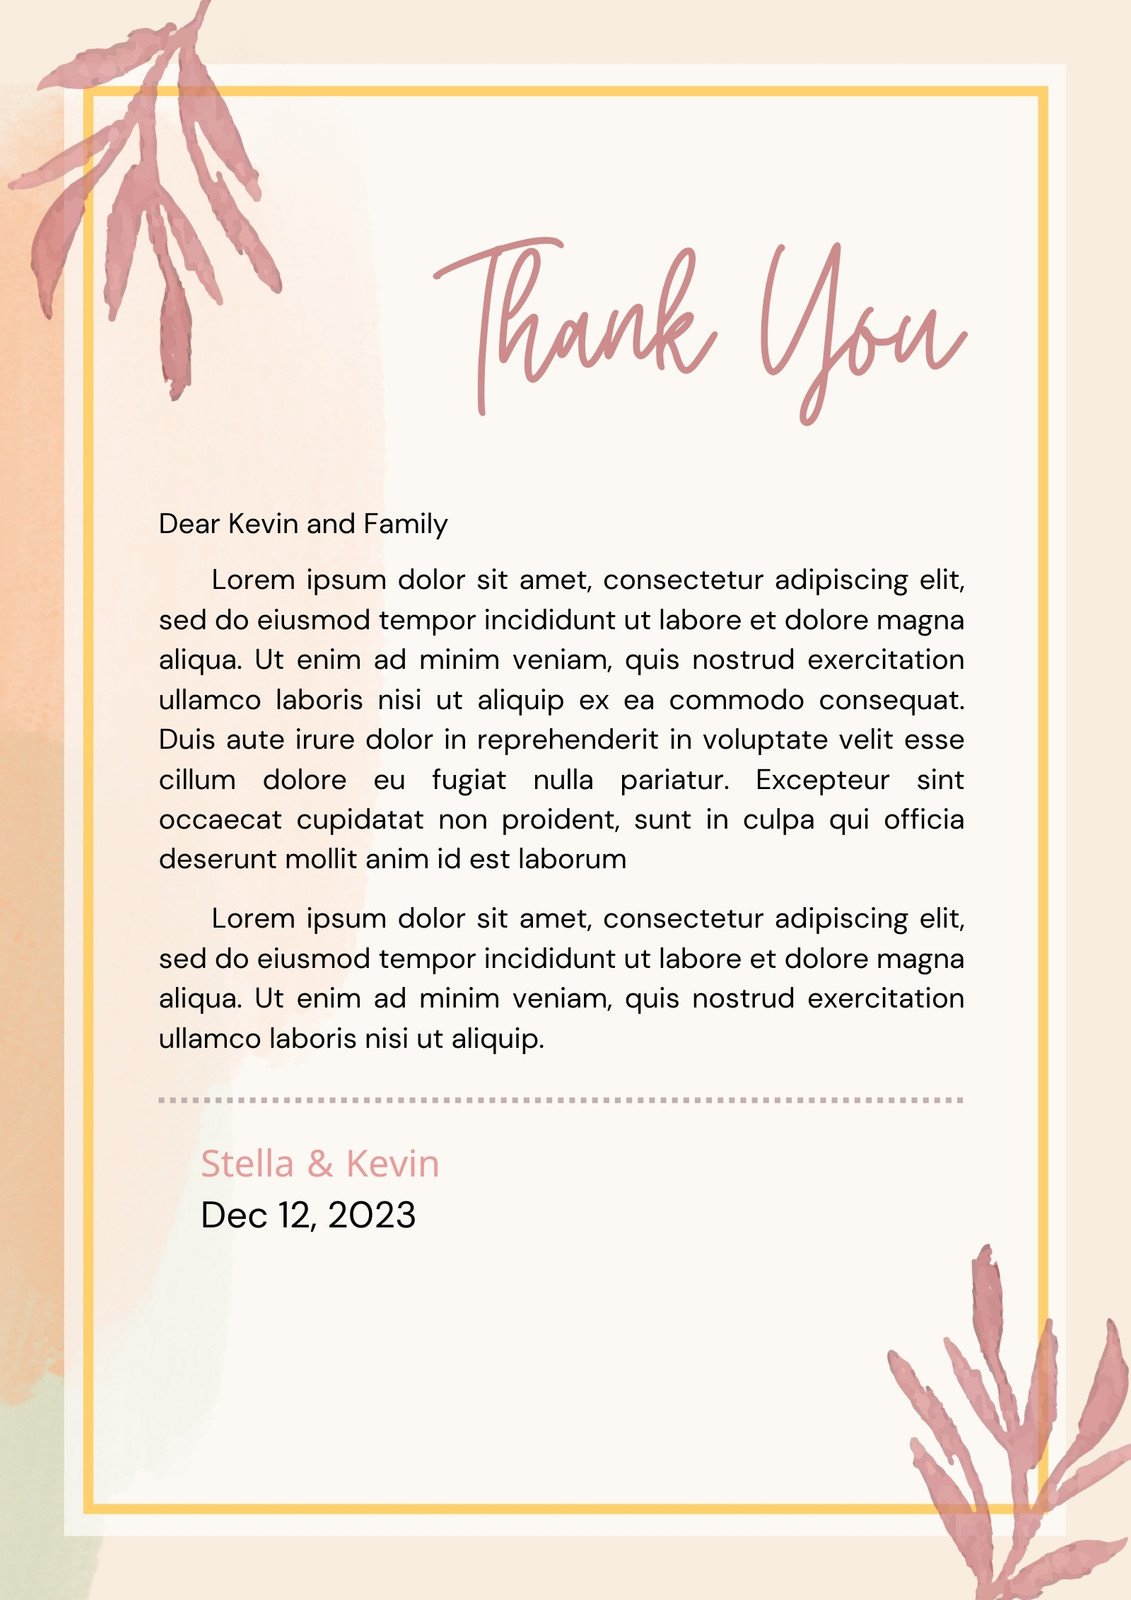 Free Business Thank You Letter Template Letterhub - vrogue.co